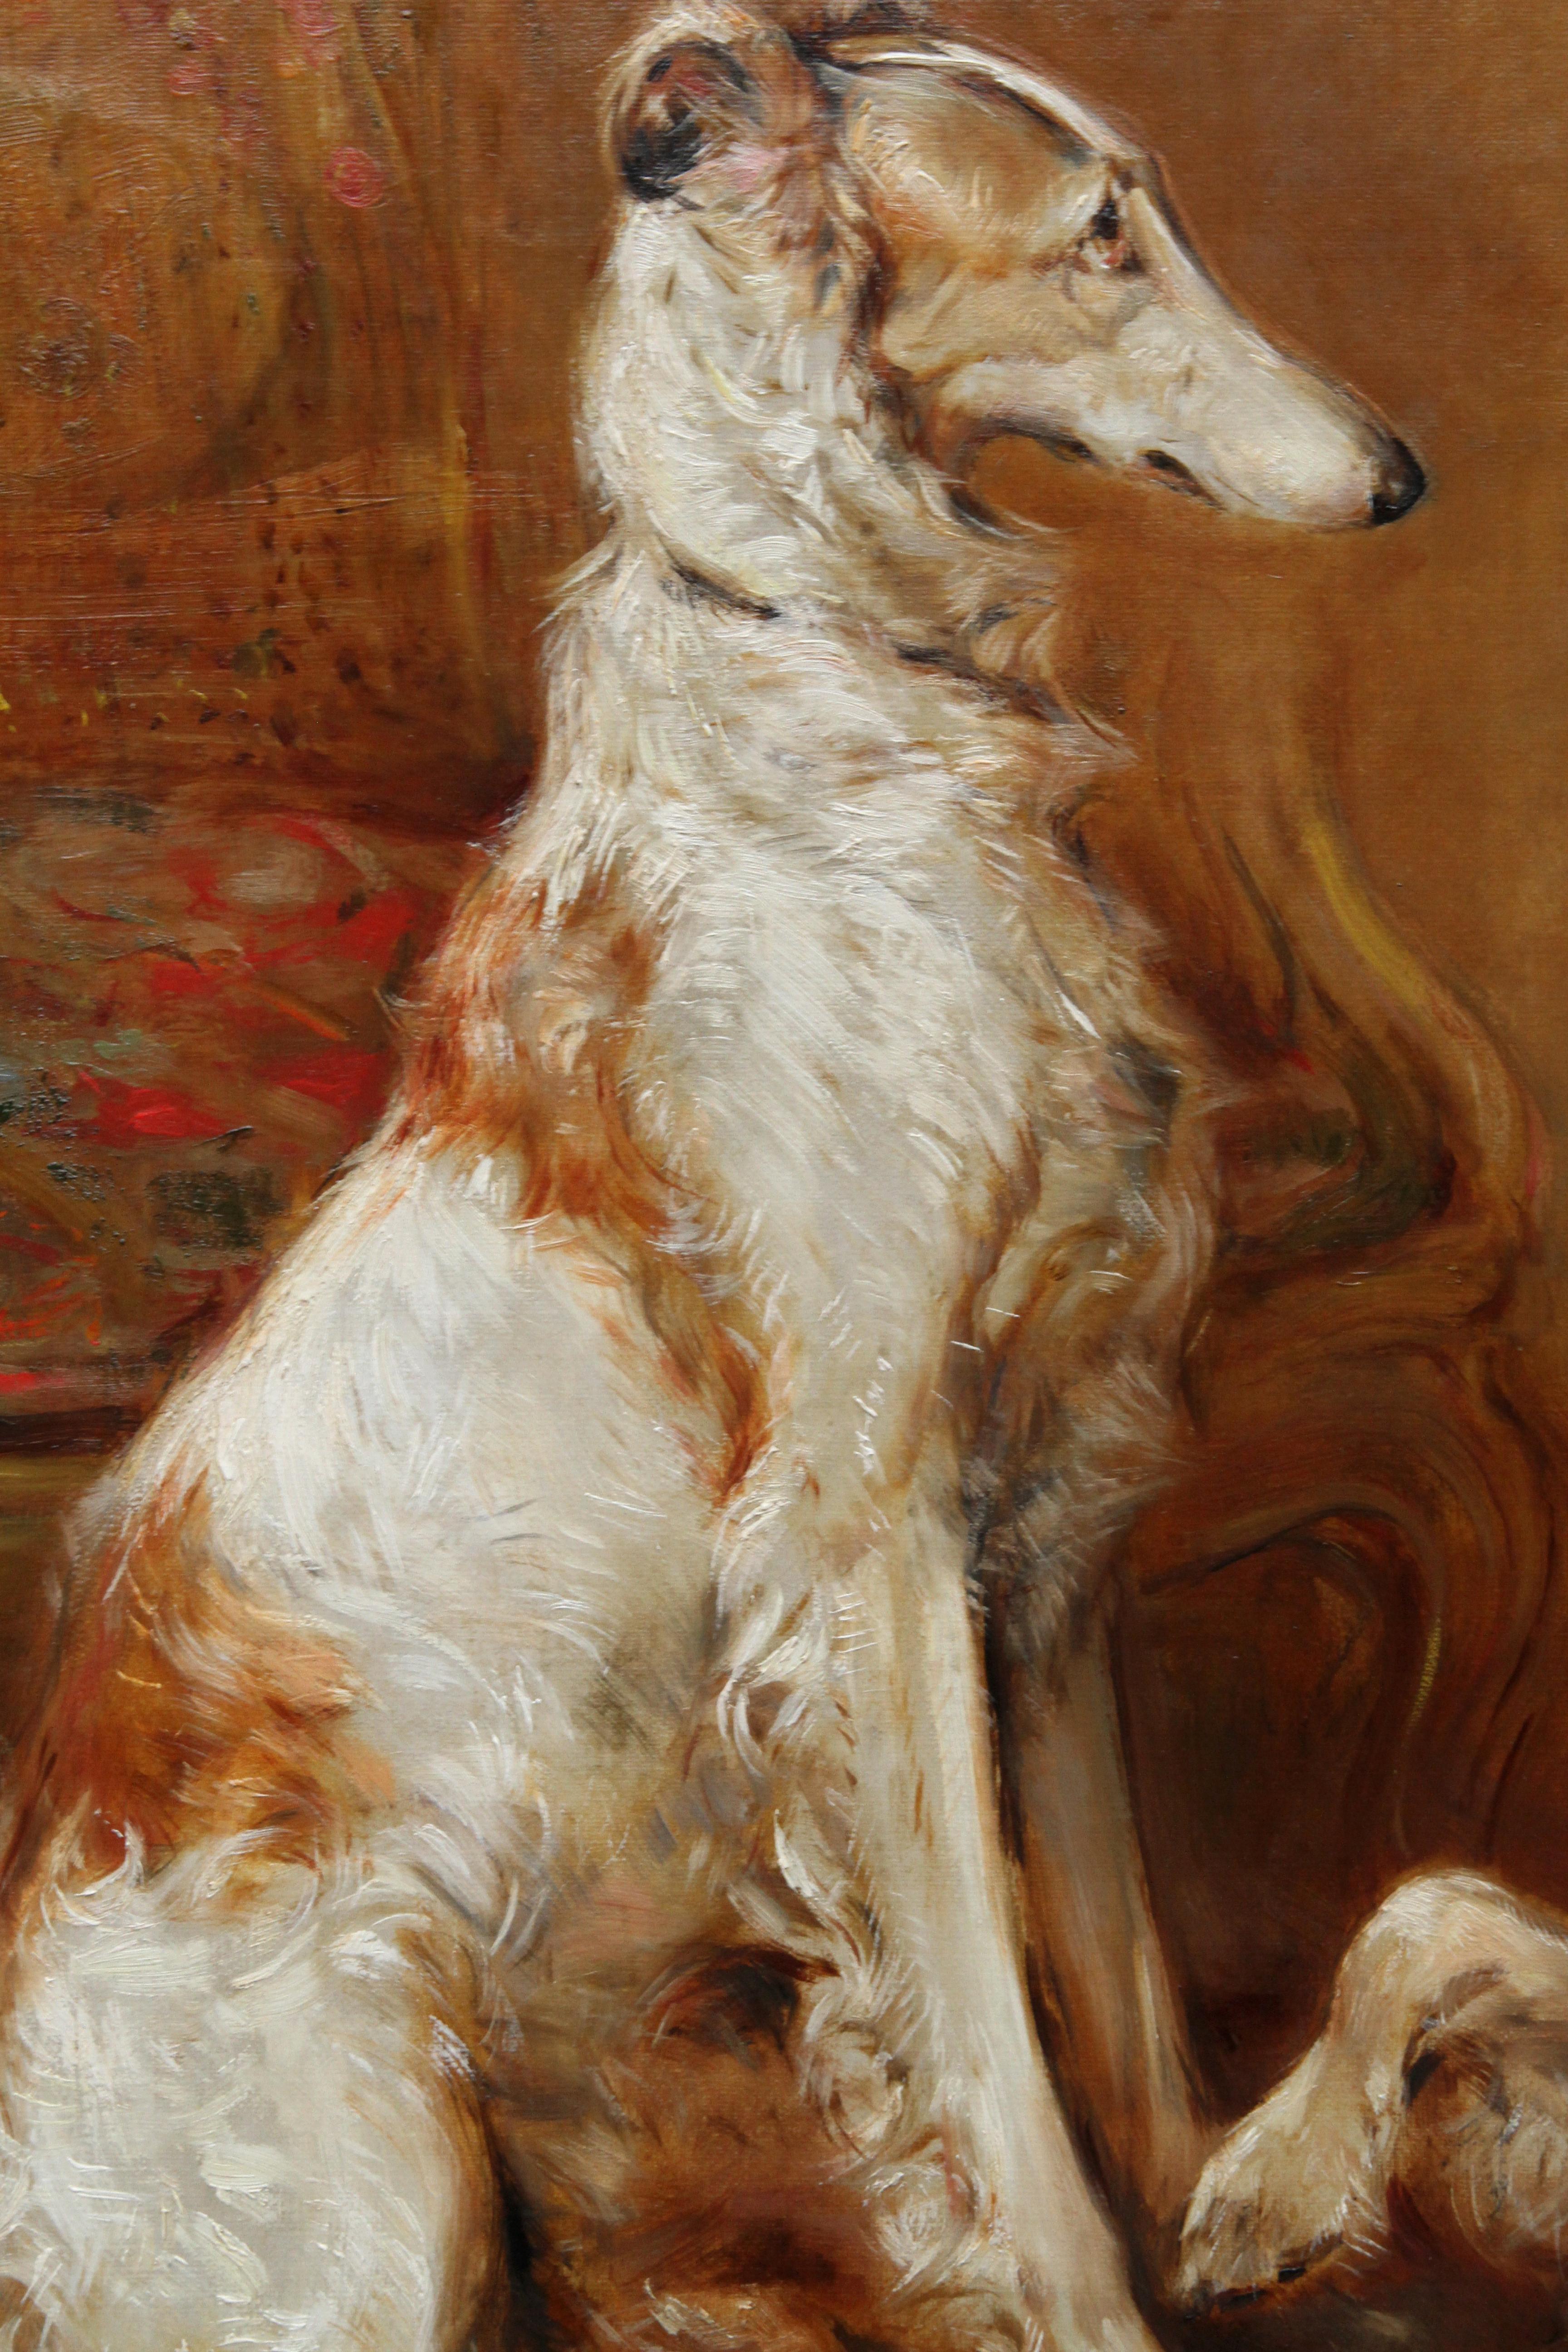 Two Borzoi Dogs in an Interior - British Edwardian Dog Art Interior Oil Painting - Brown Portrait Painting by Philip Eustace Stretton